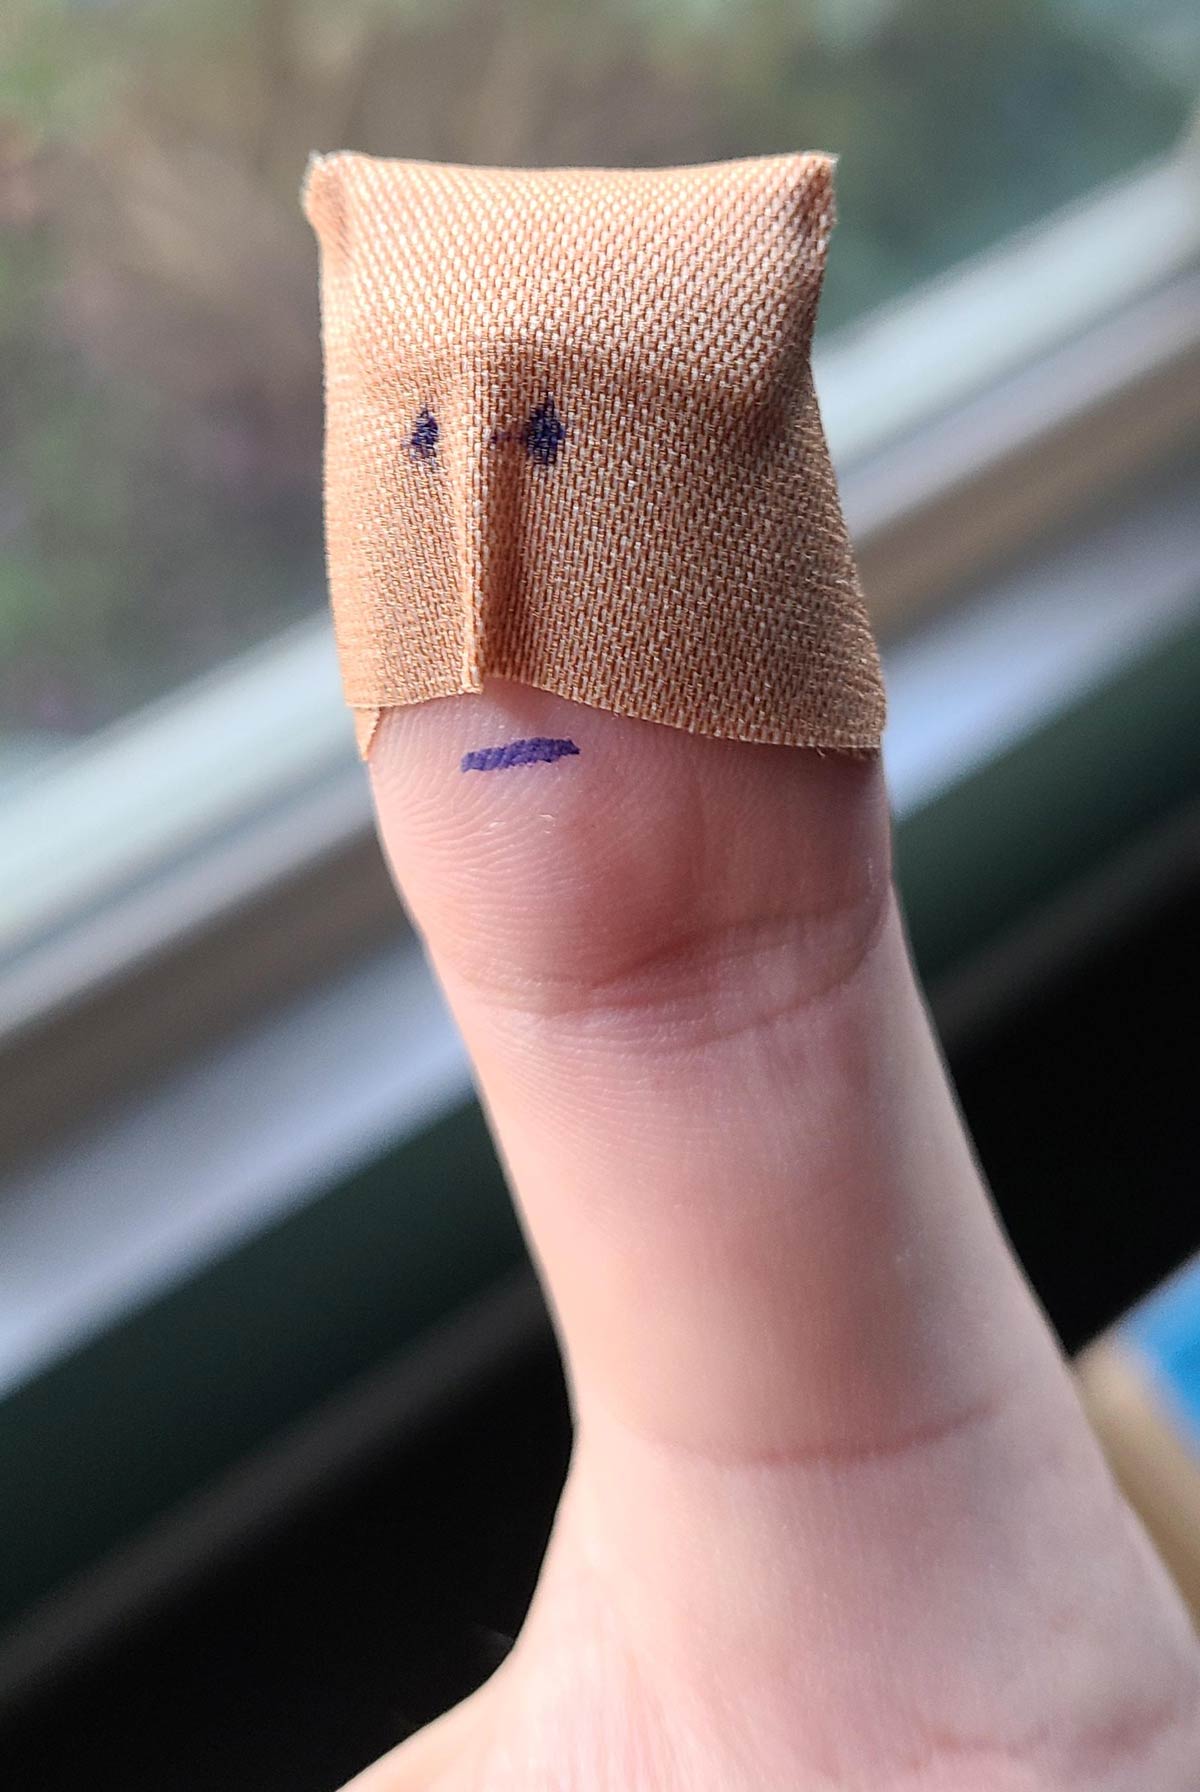 Sliced my finger open. Realized after putting on the bandaid that it looked like a lame superhero